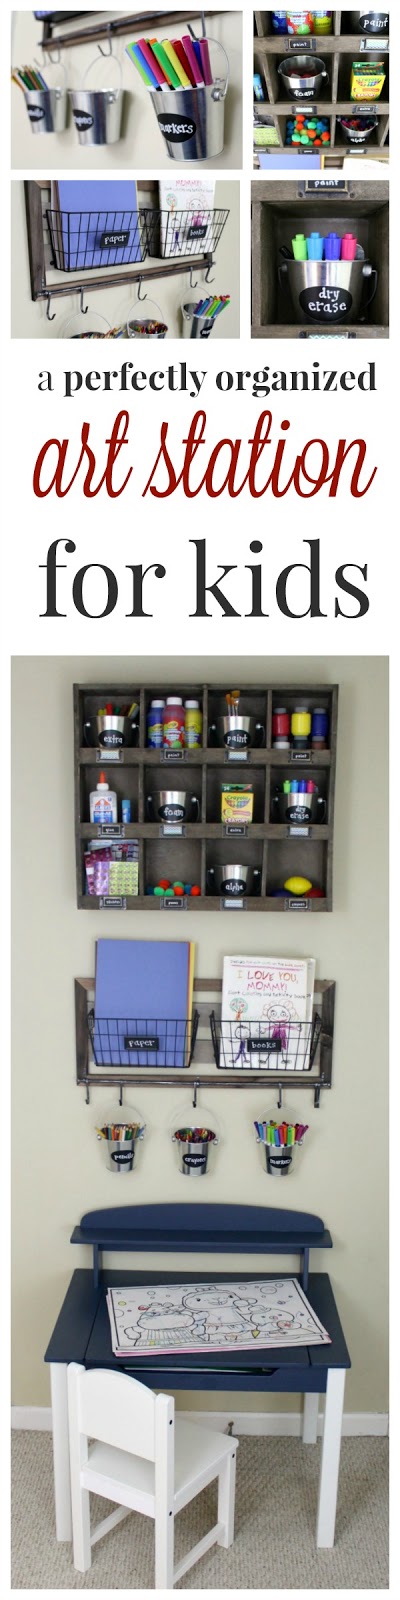 A perfectly organized art station for kids- great way to organized art supplies for easy set up and clean up of art or craft projects from toddler to elementary schoool age